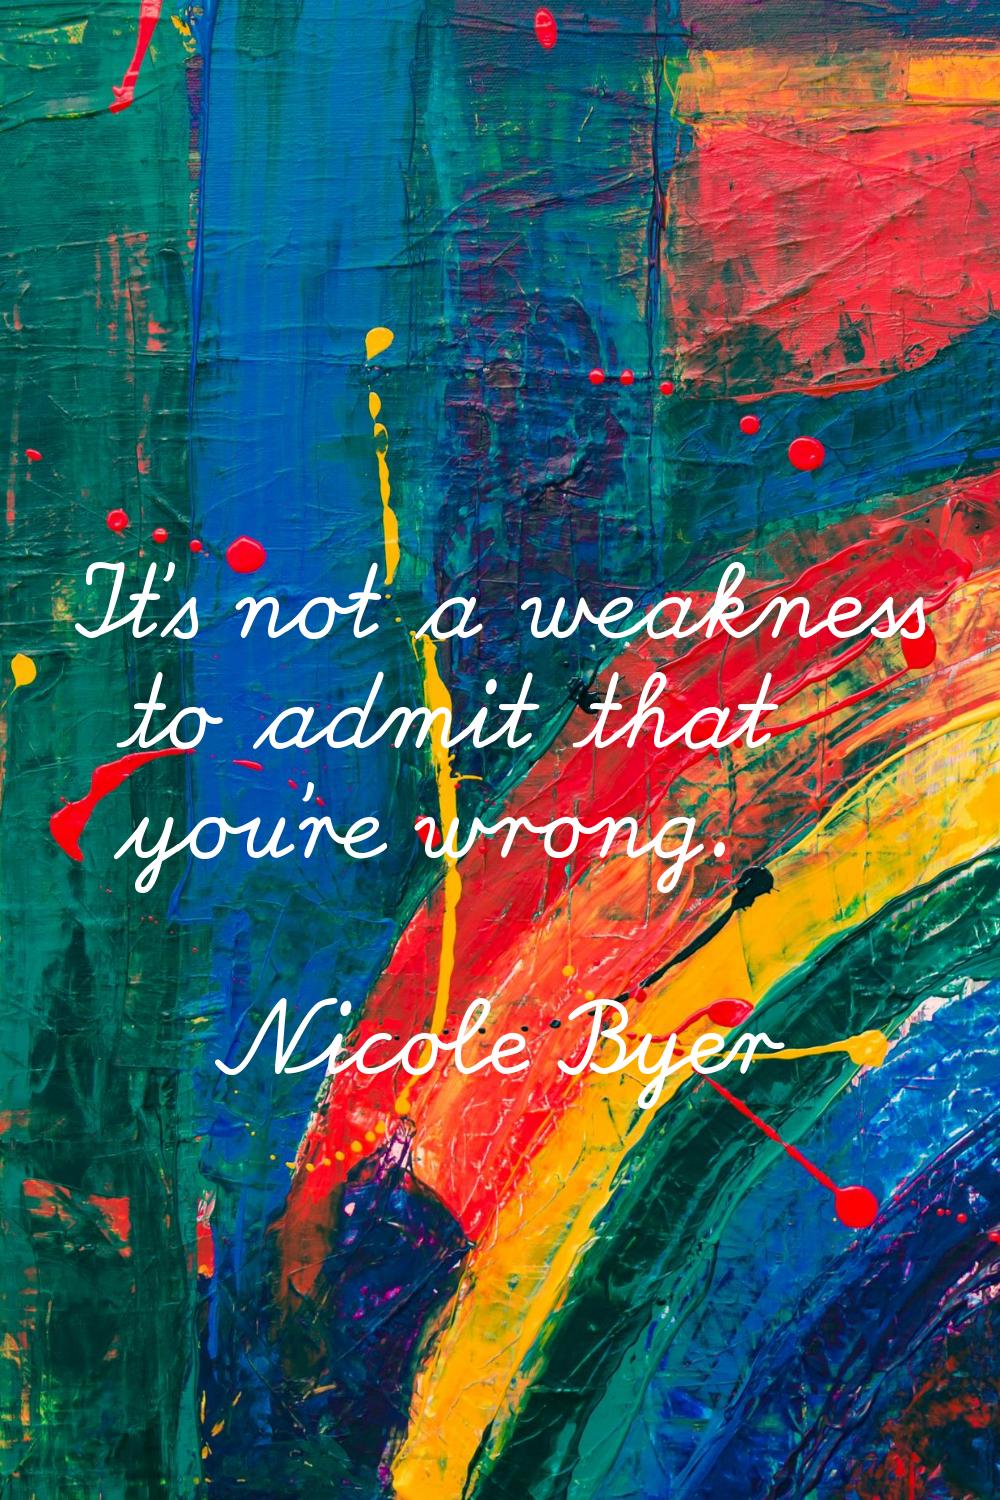 It's not a weakness to admit that you're wrong.